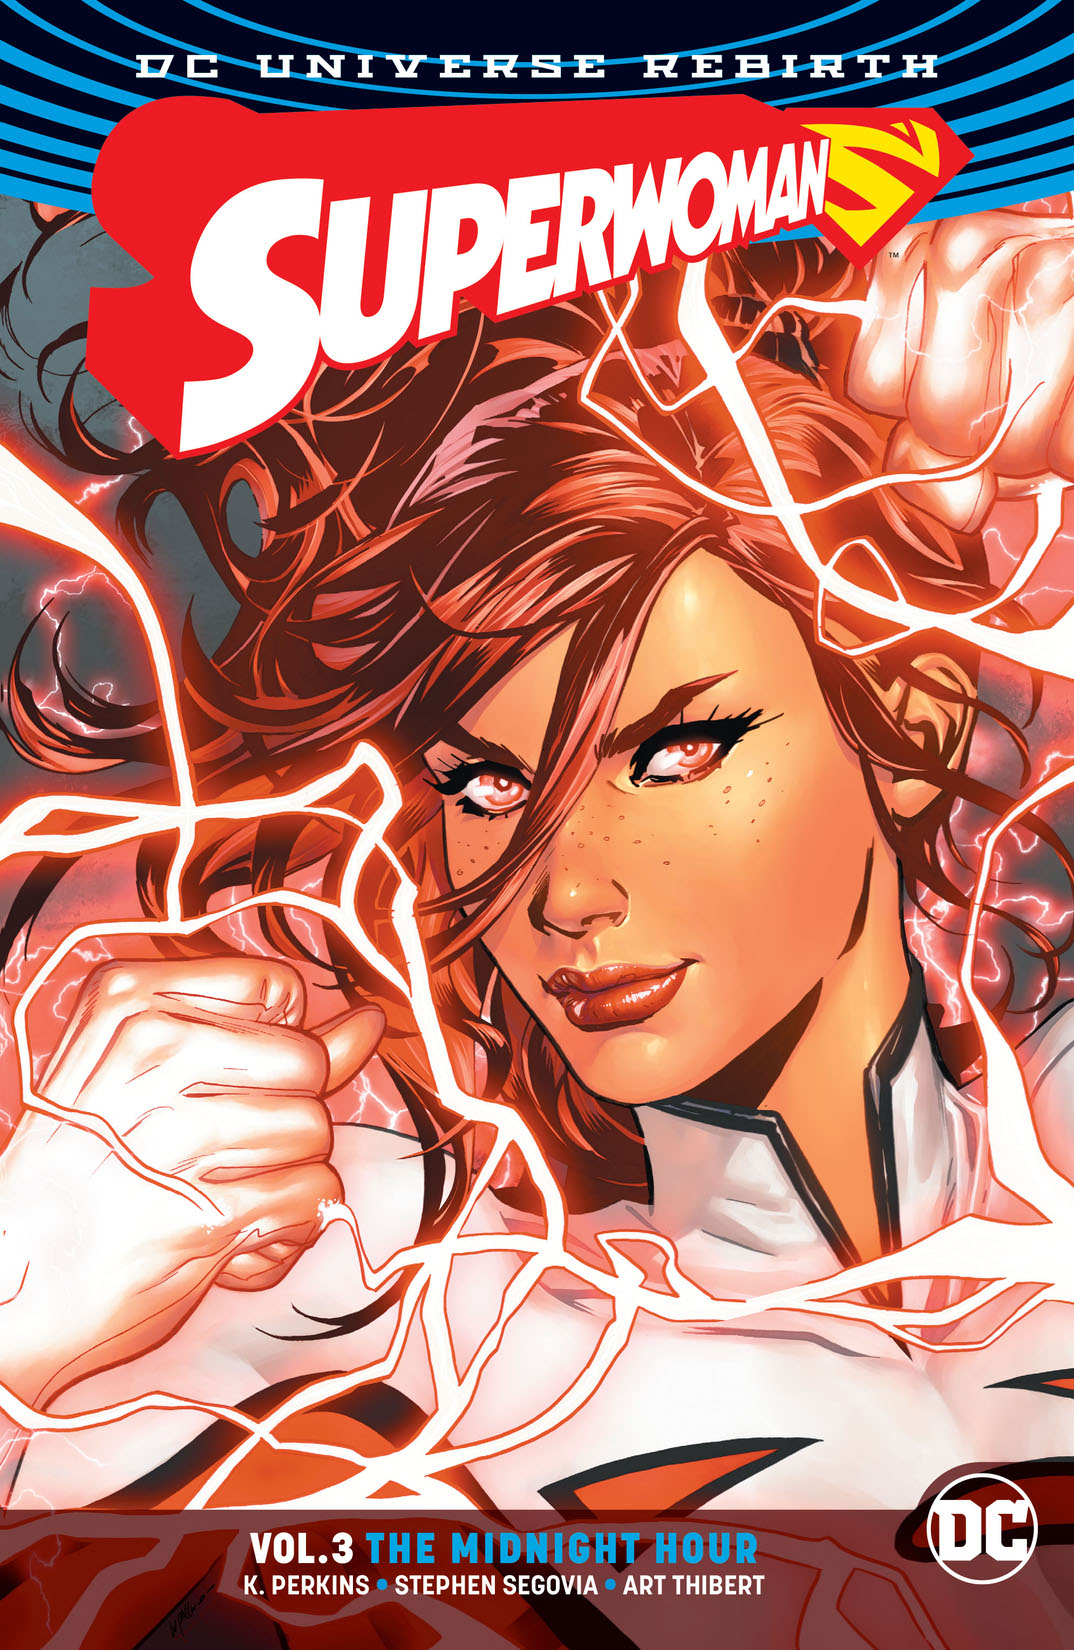 Superwoman Vol. 3: The Midnight Hour preview images